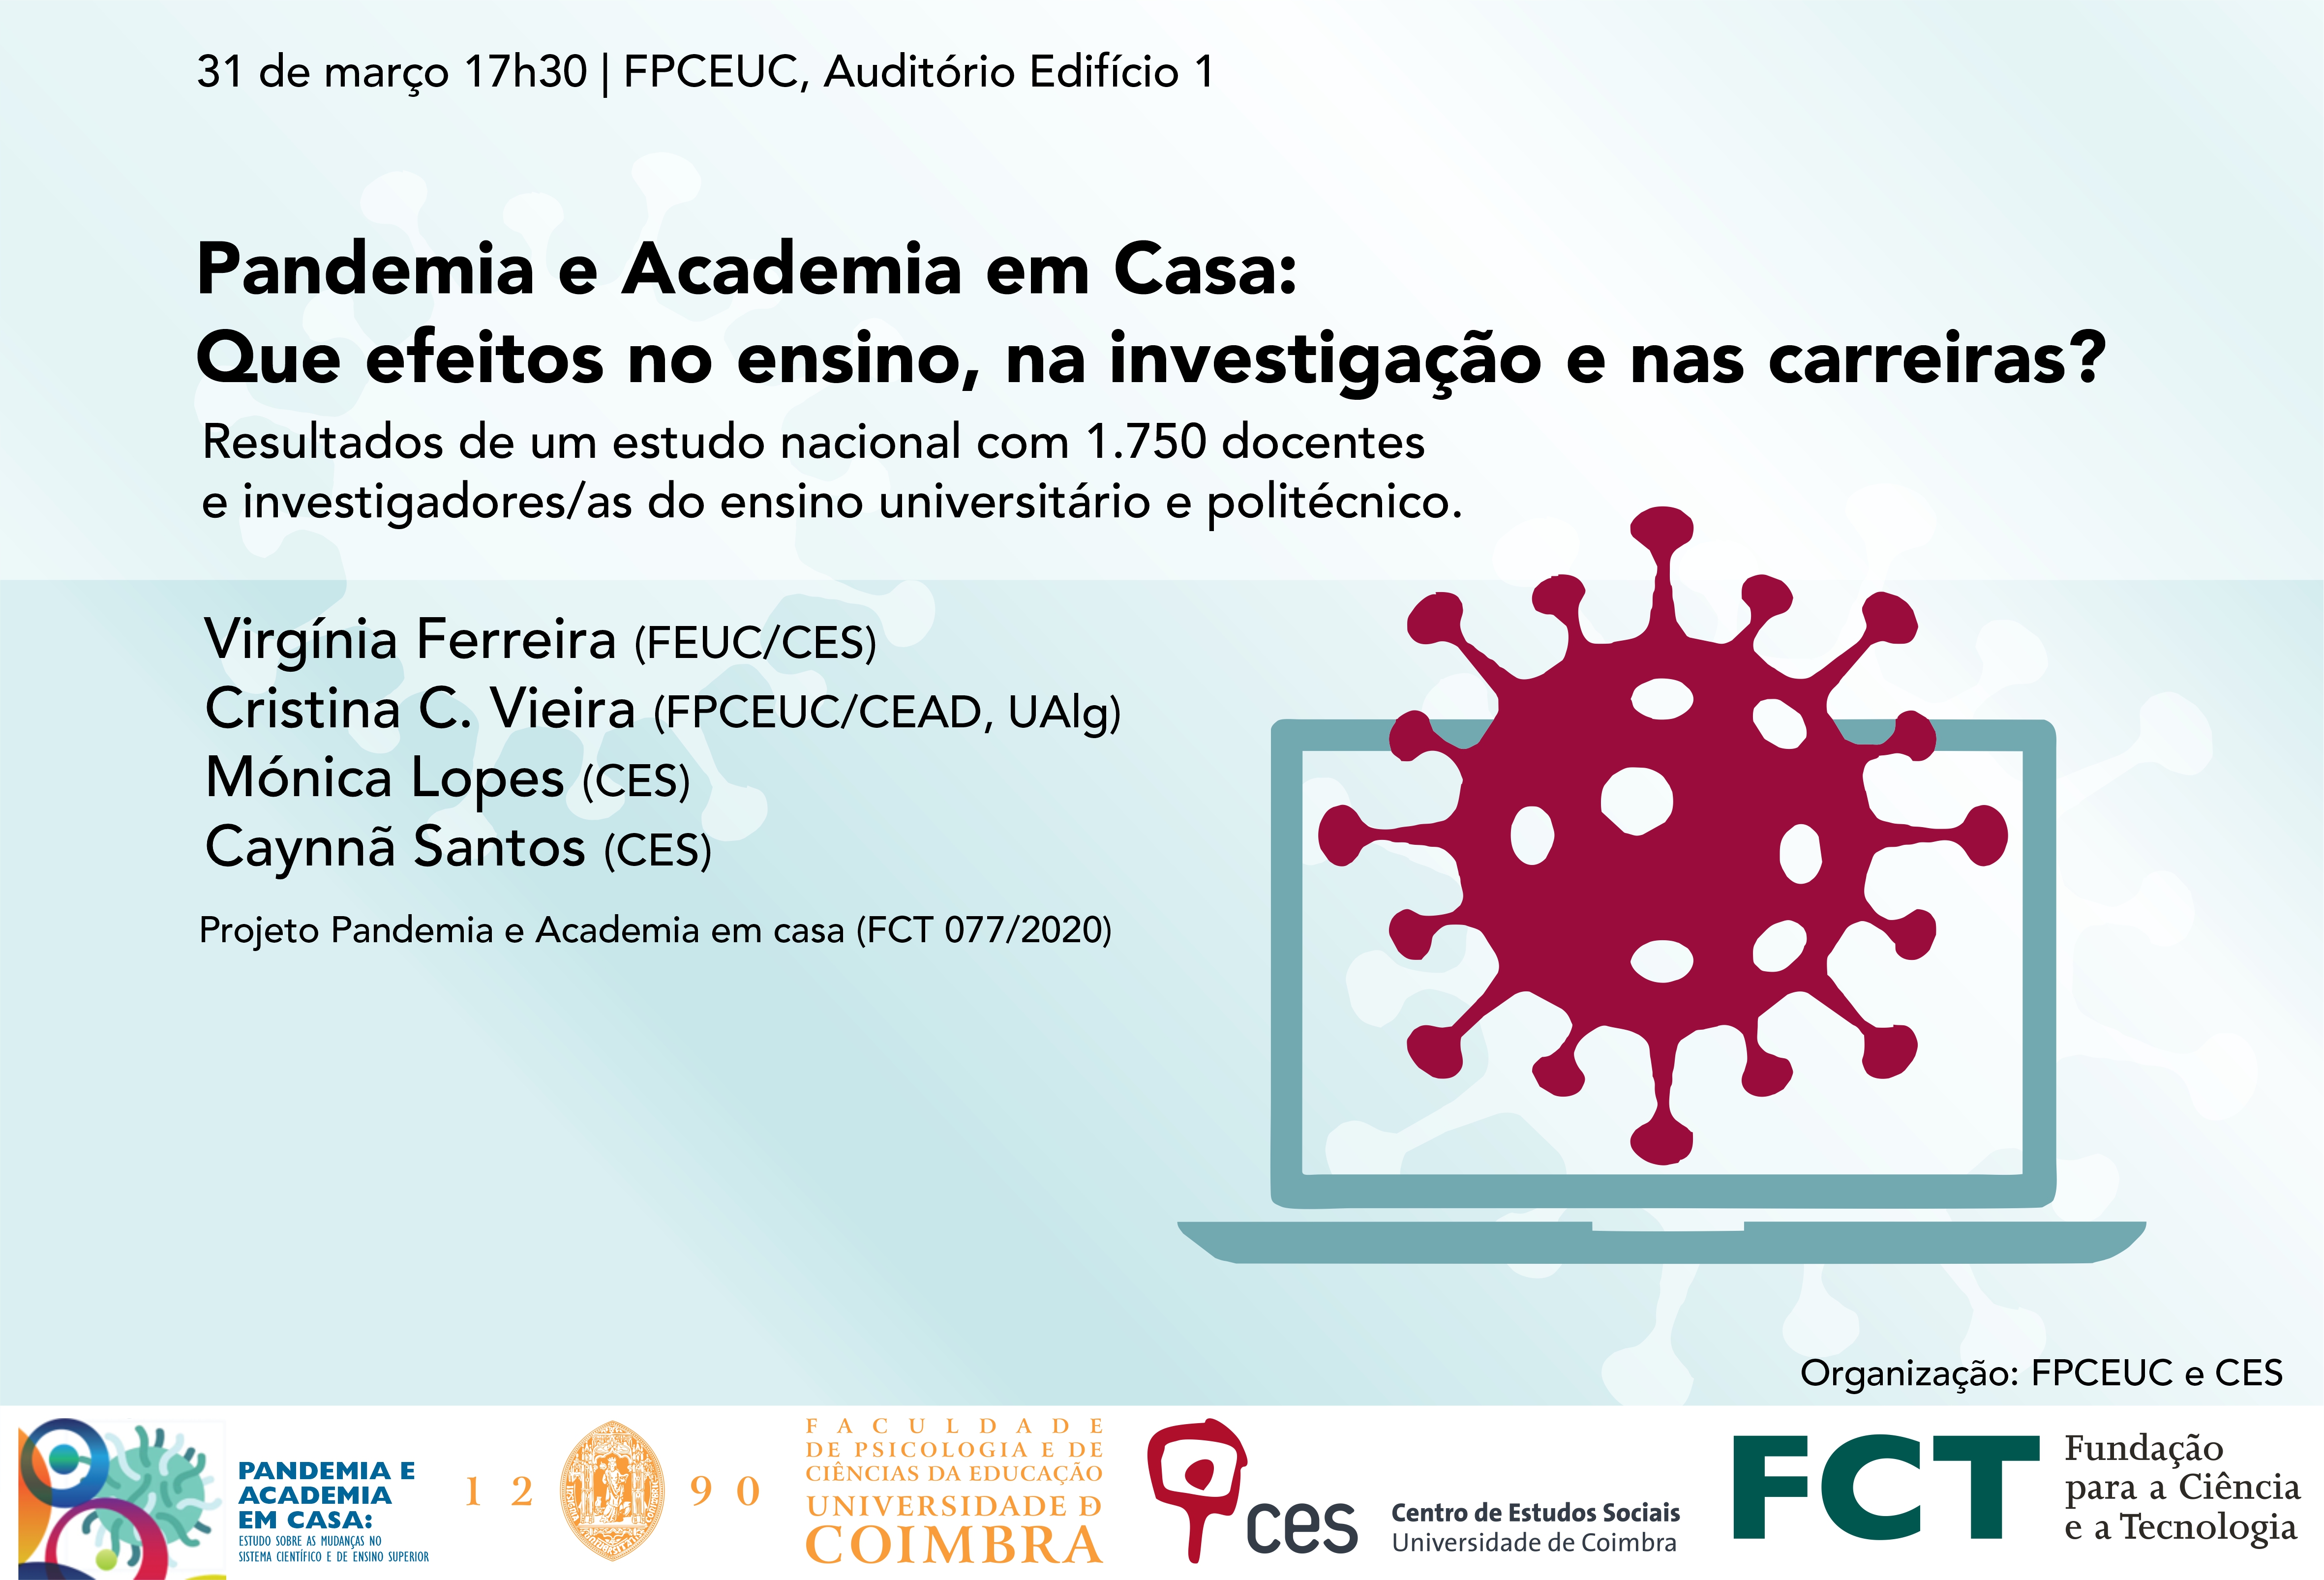 Pandemic and Academia at Home: what effects on teaching, research and careers?<span id="edit_38073"><script>$(function() { $('#edit_38073').load( "/myces/user/editobj.php?tipo=evento&id=38073" ); });</script></span>